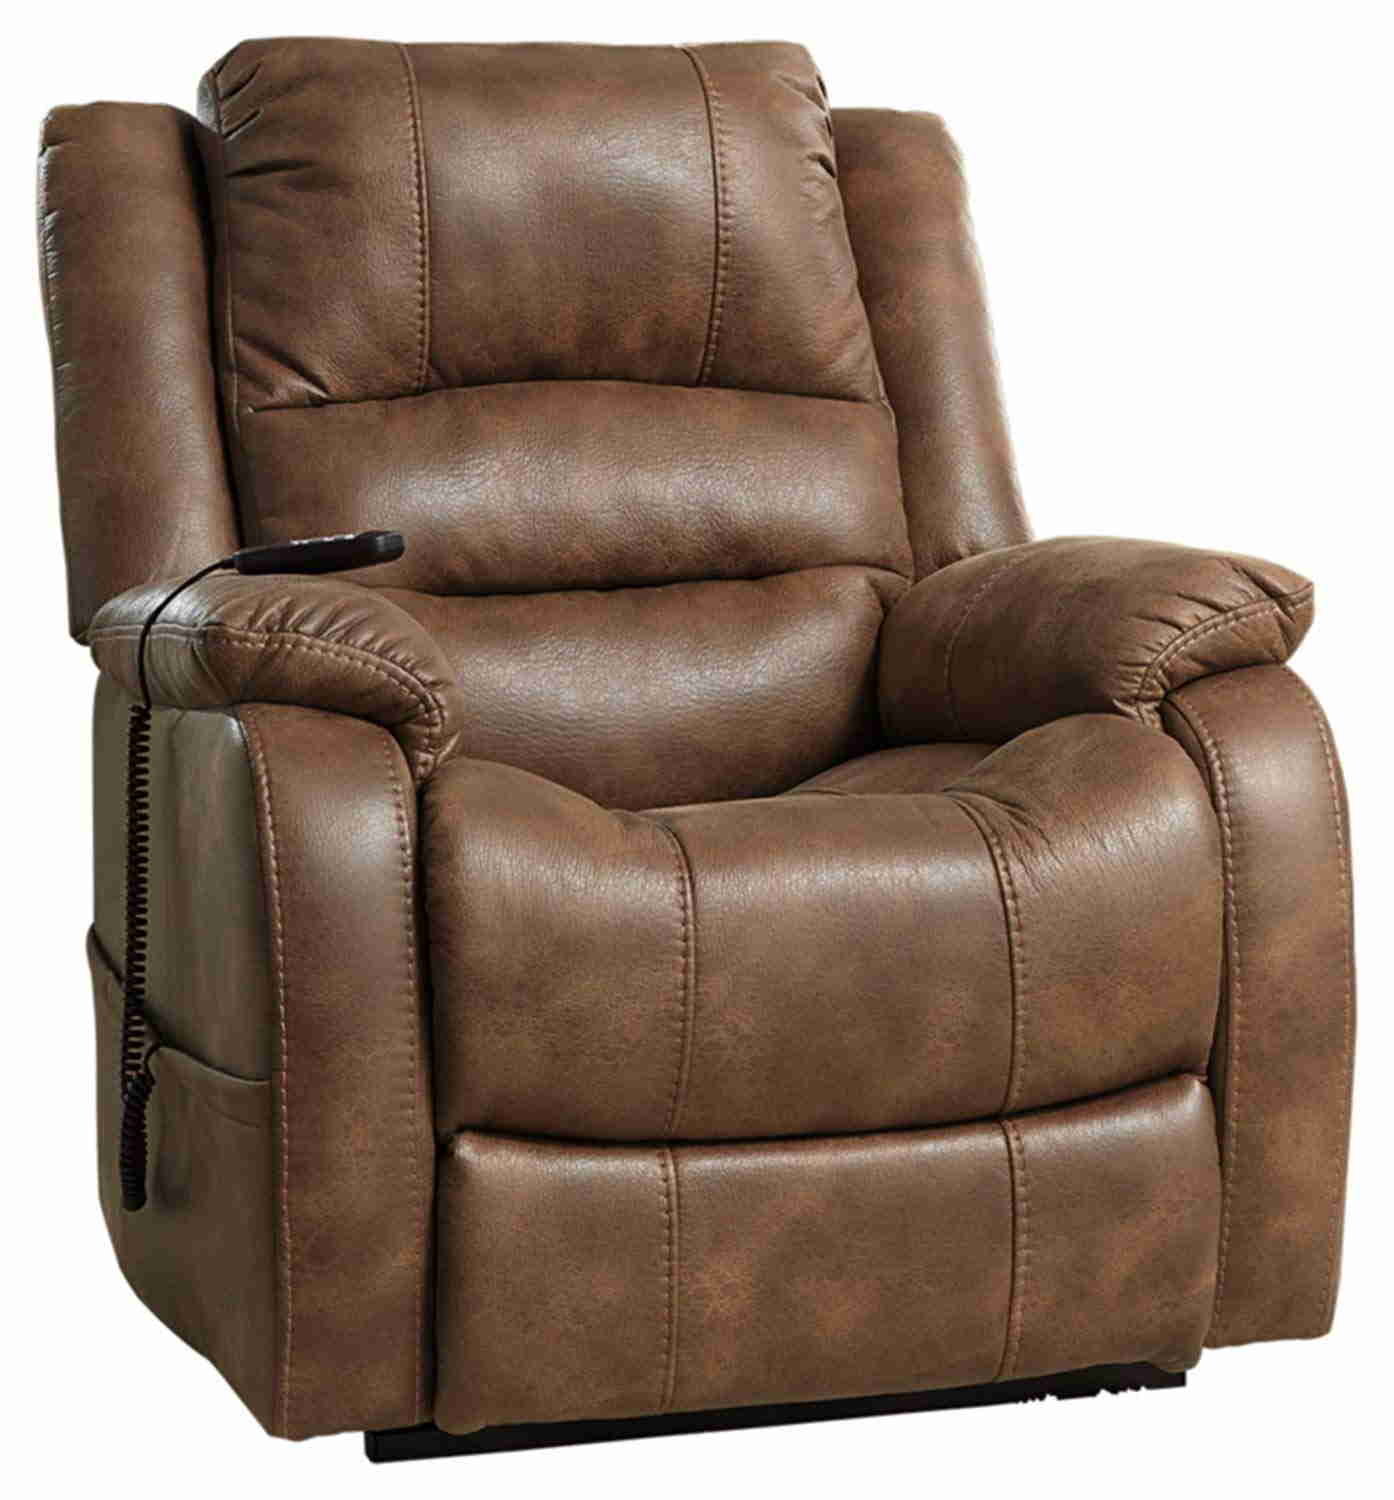 chair recliners